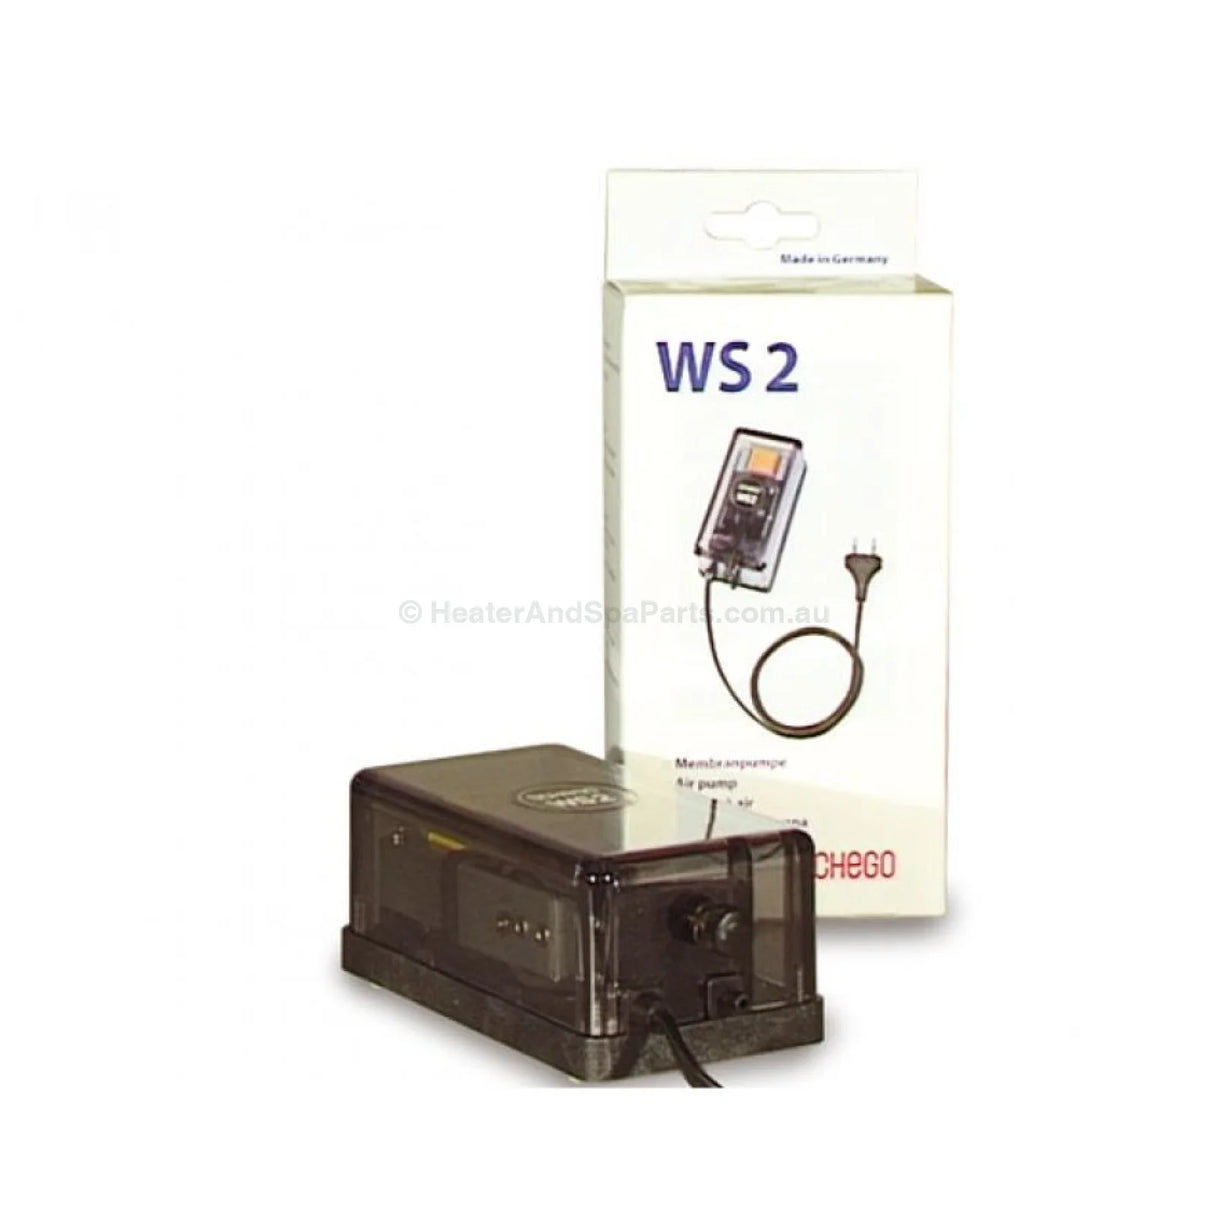 Schego WS2 Air Pump for Ozone or Air Injection - Heater and Spa Parts